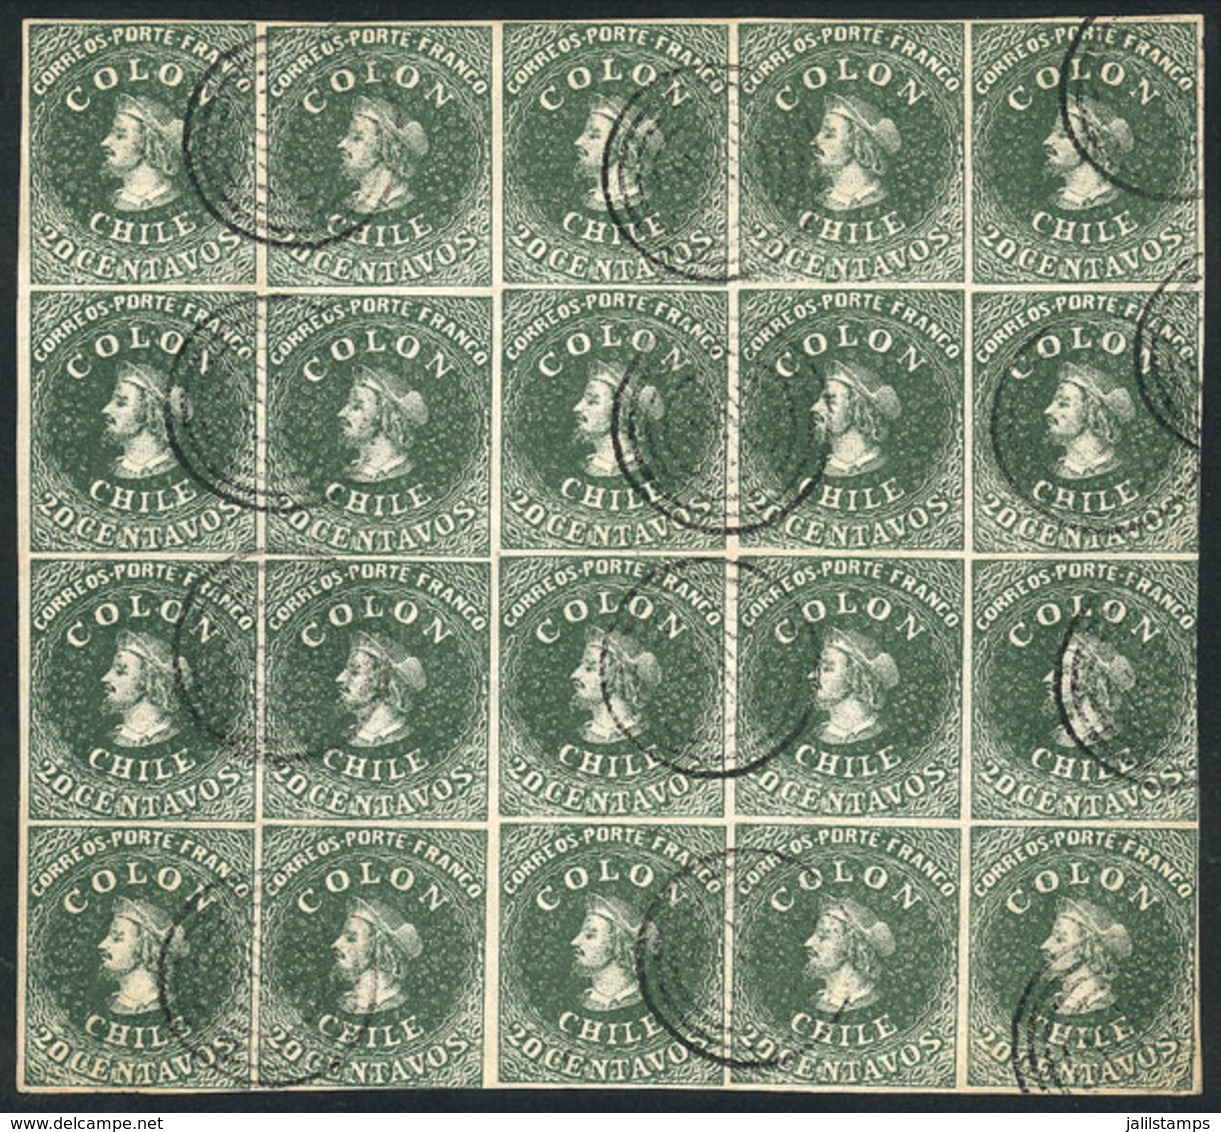 1031 CHILE: GJ.13, 1862 20c. Green, Unwatermarked REPRINT, Beautiful Block Of 20 Stamps, Excellent Quality! - Chile